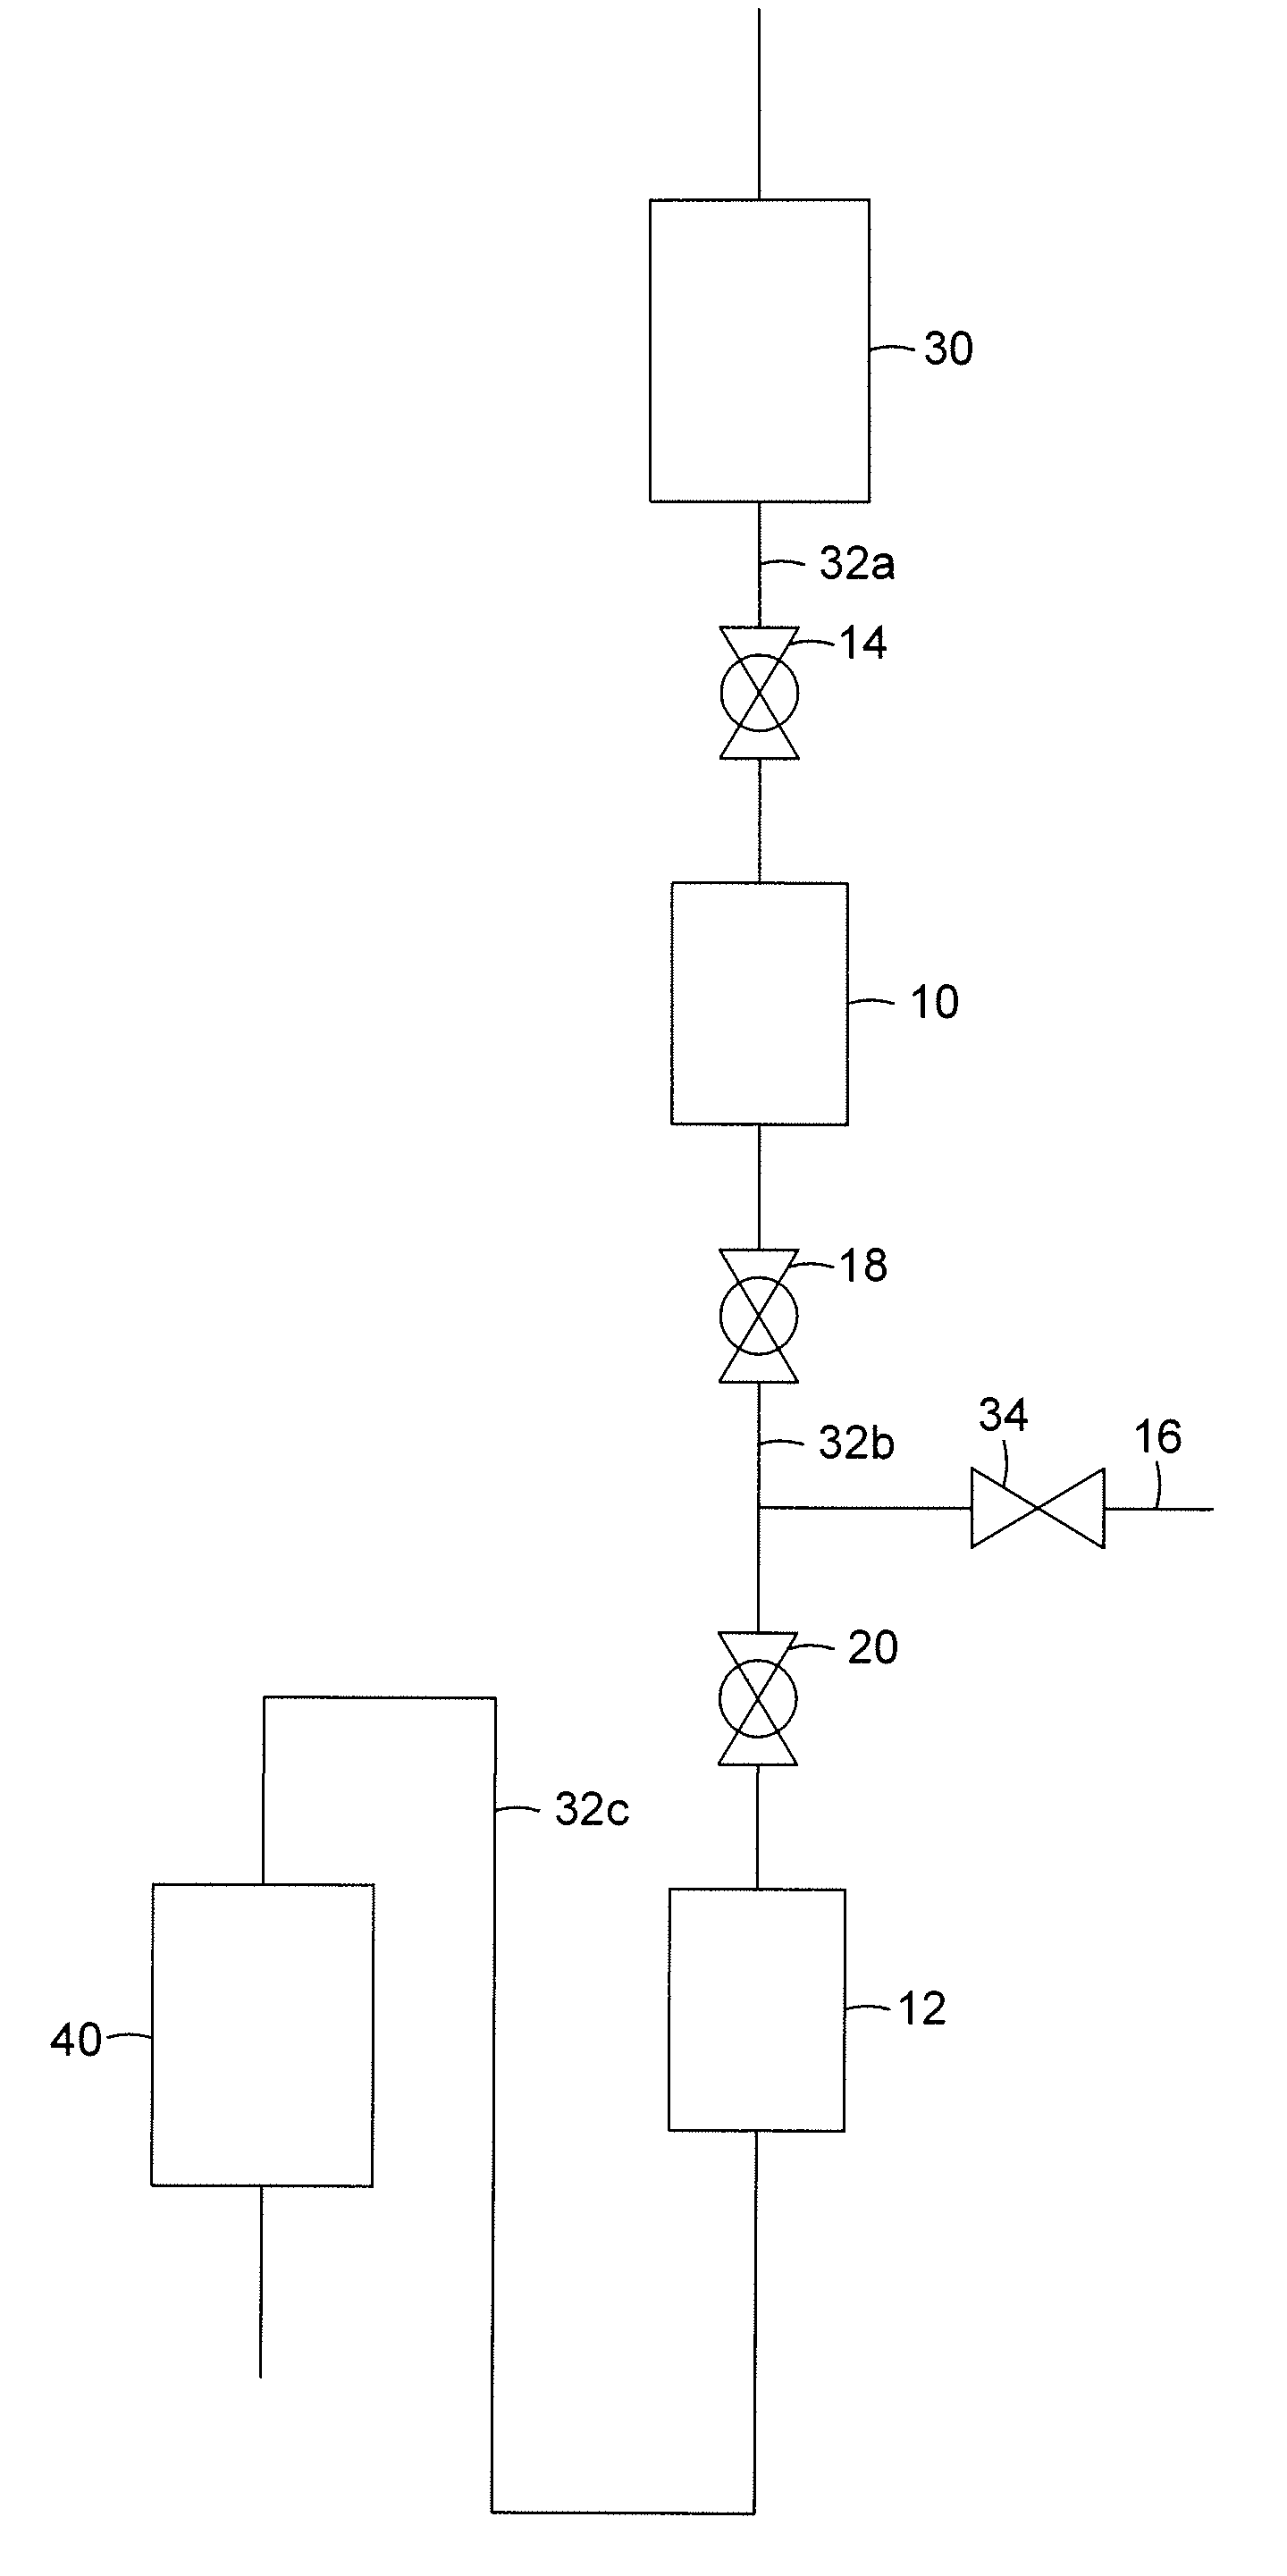 Device to transfer catalyst from a low pressure vessel to a high pressure vessel and purge the transferred catalyst